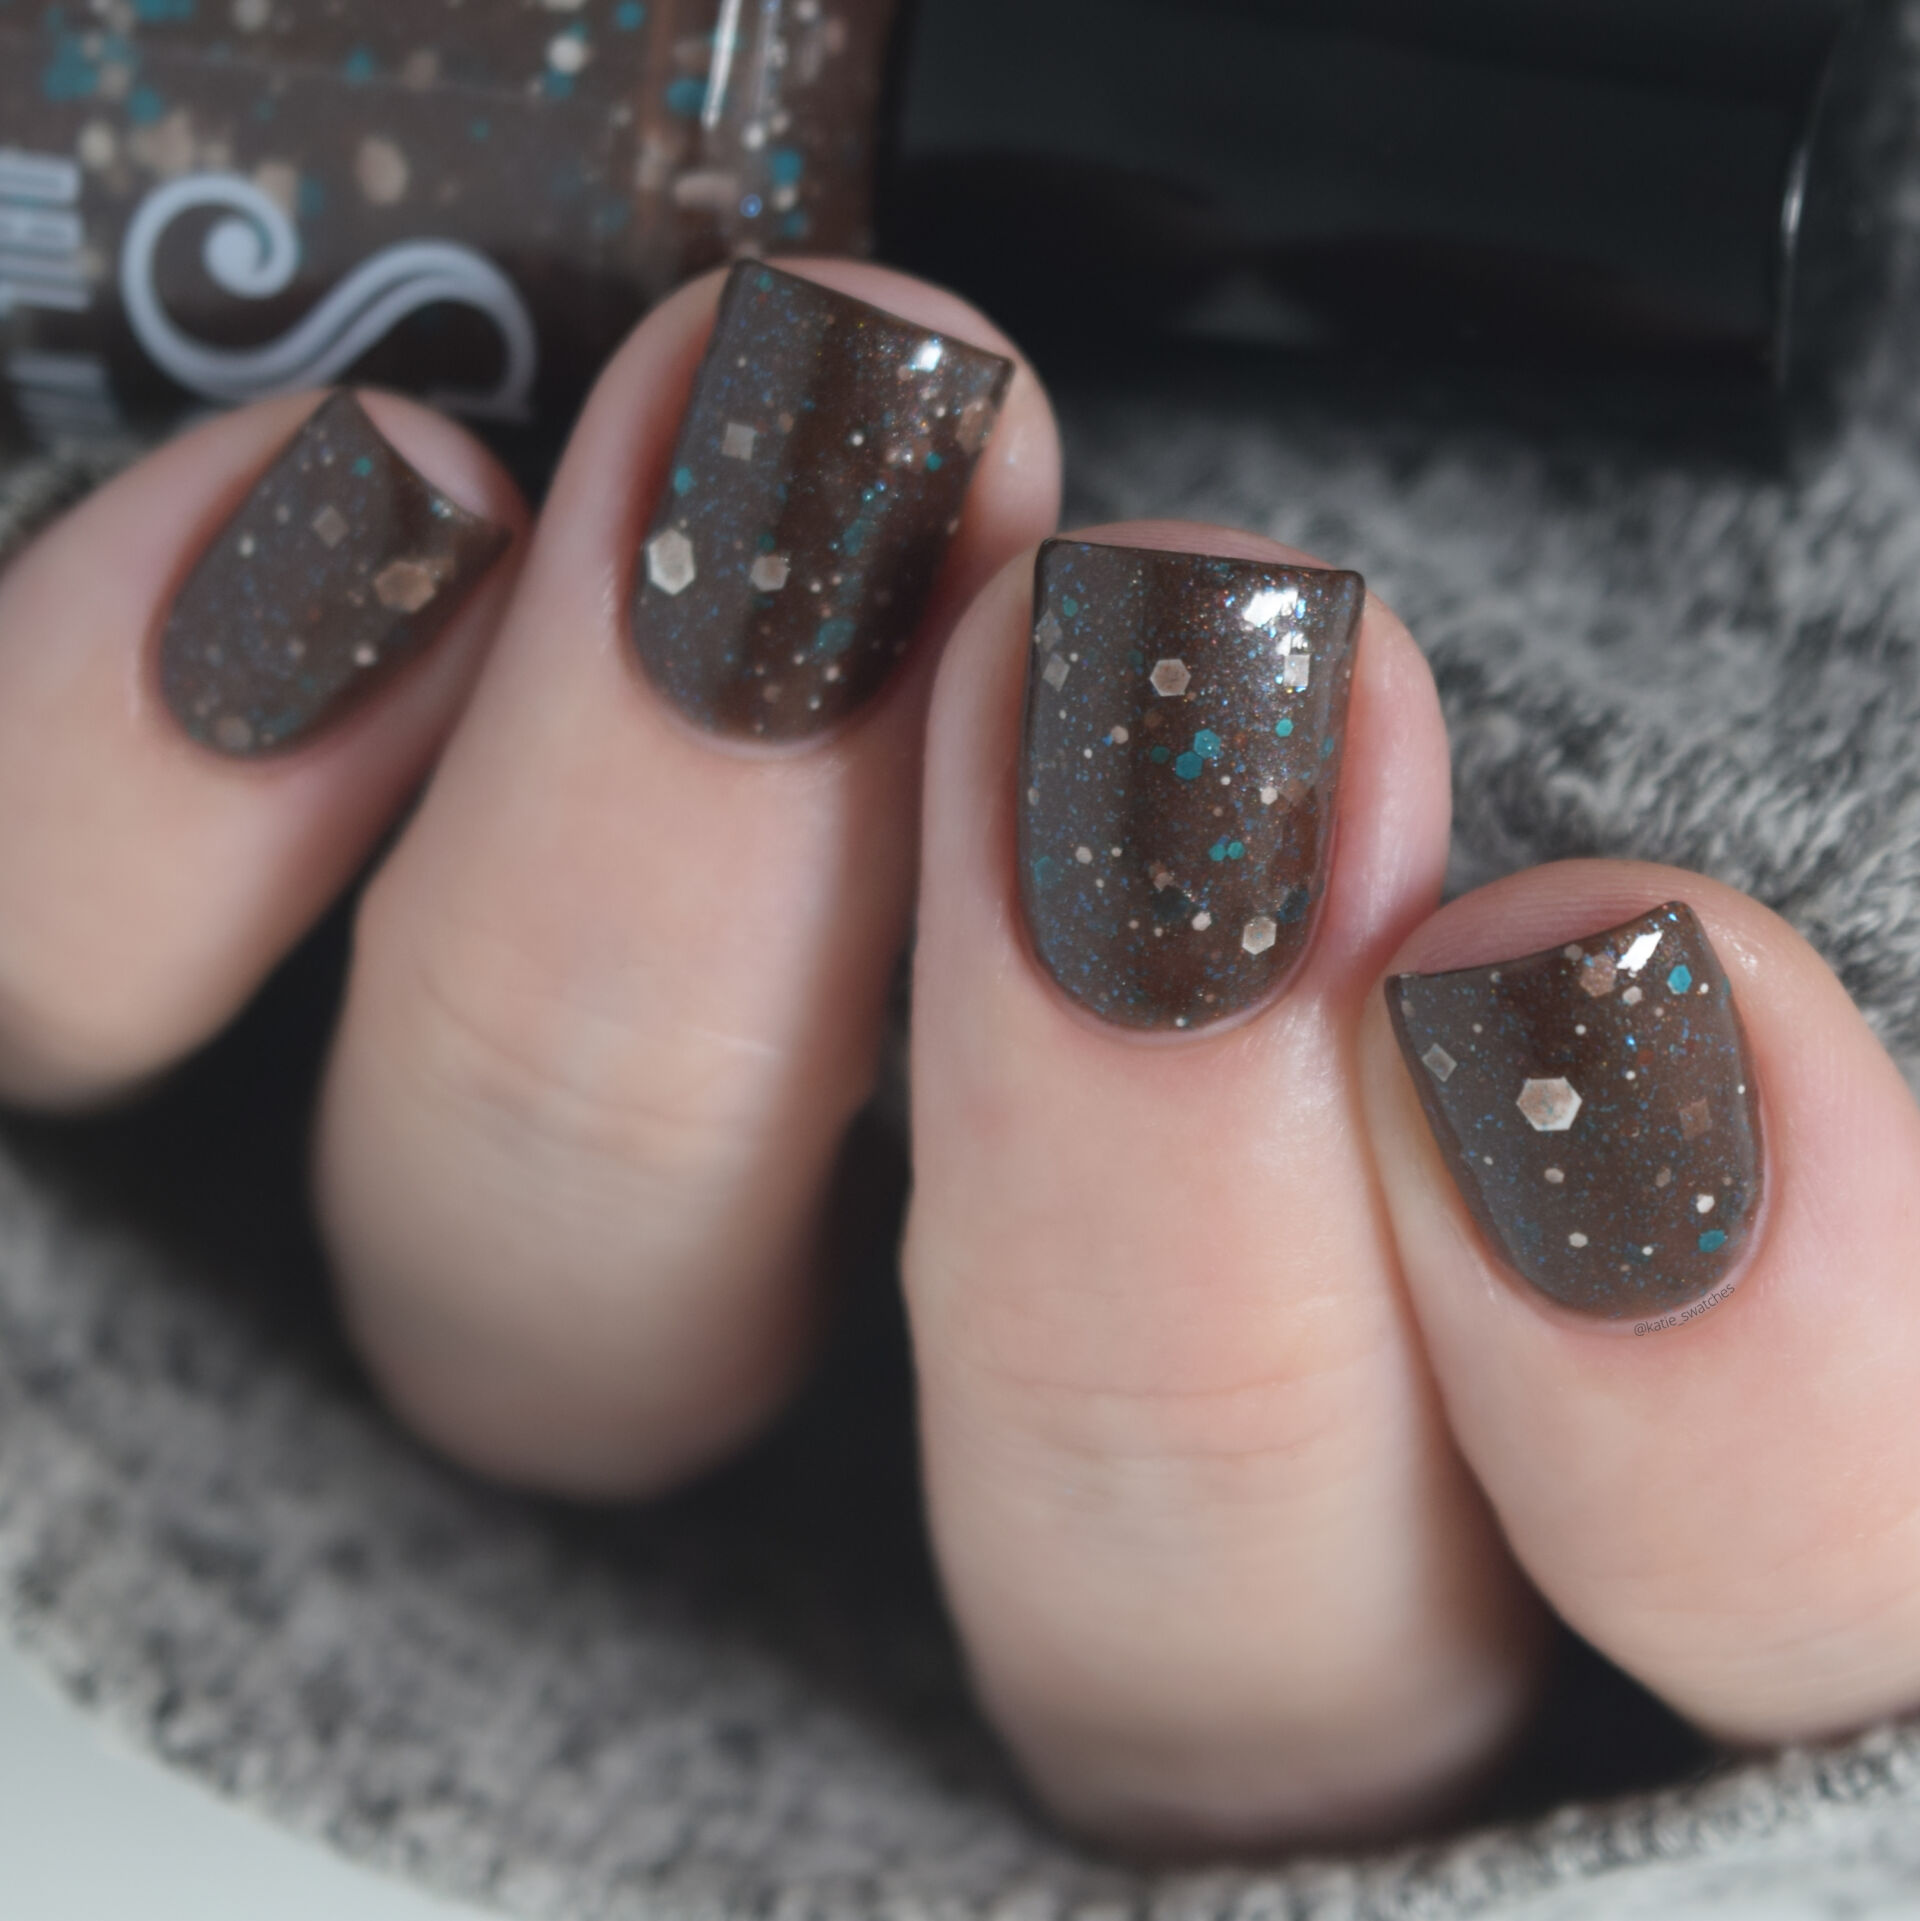 Scofflaw Nail Varnish Jackalope nail polish is a brown crelly with white and turquoise glitter in different shapes and sizes